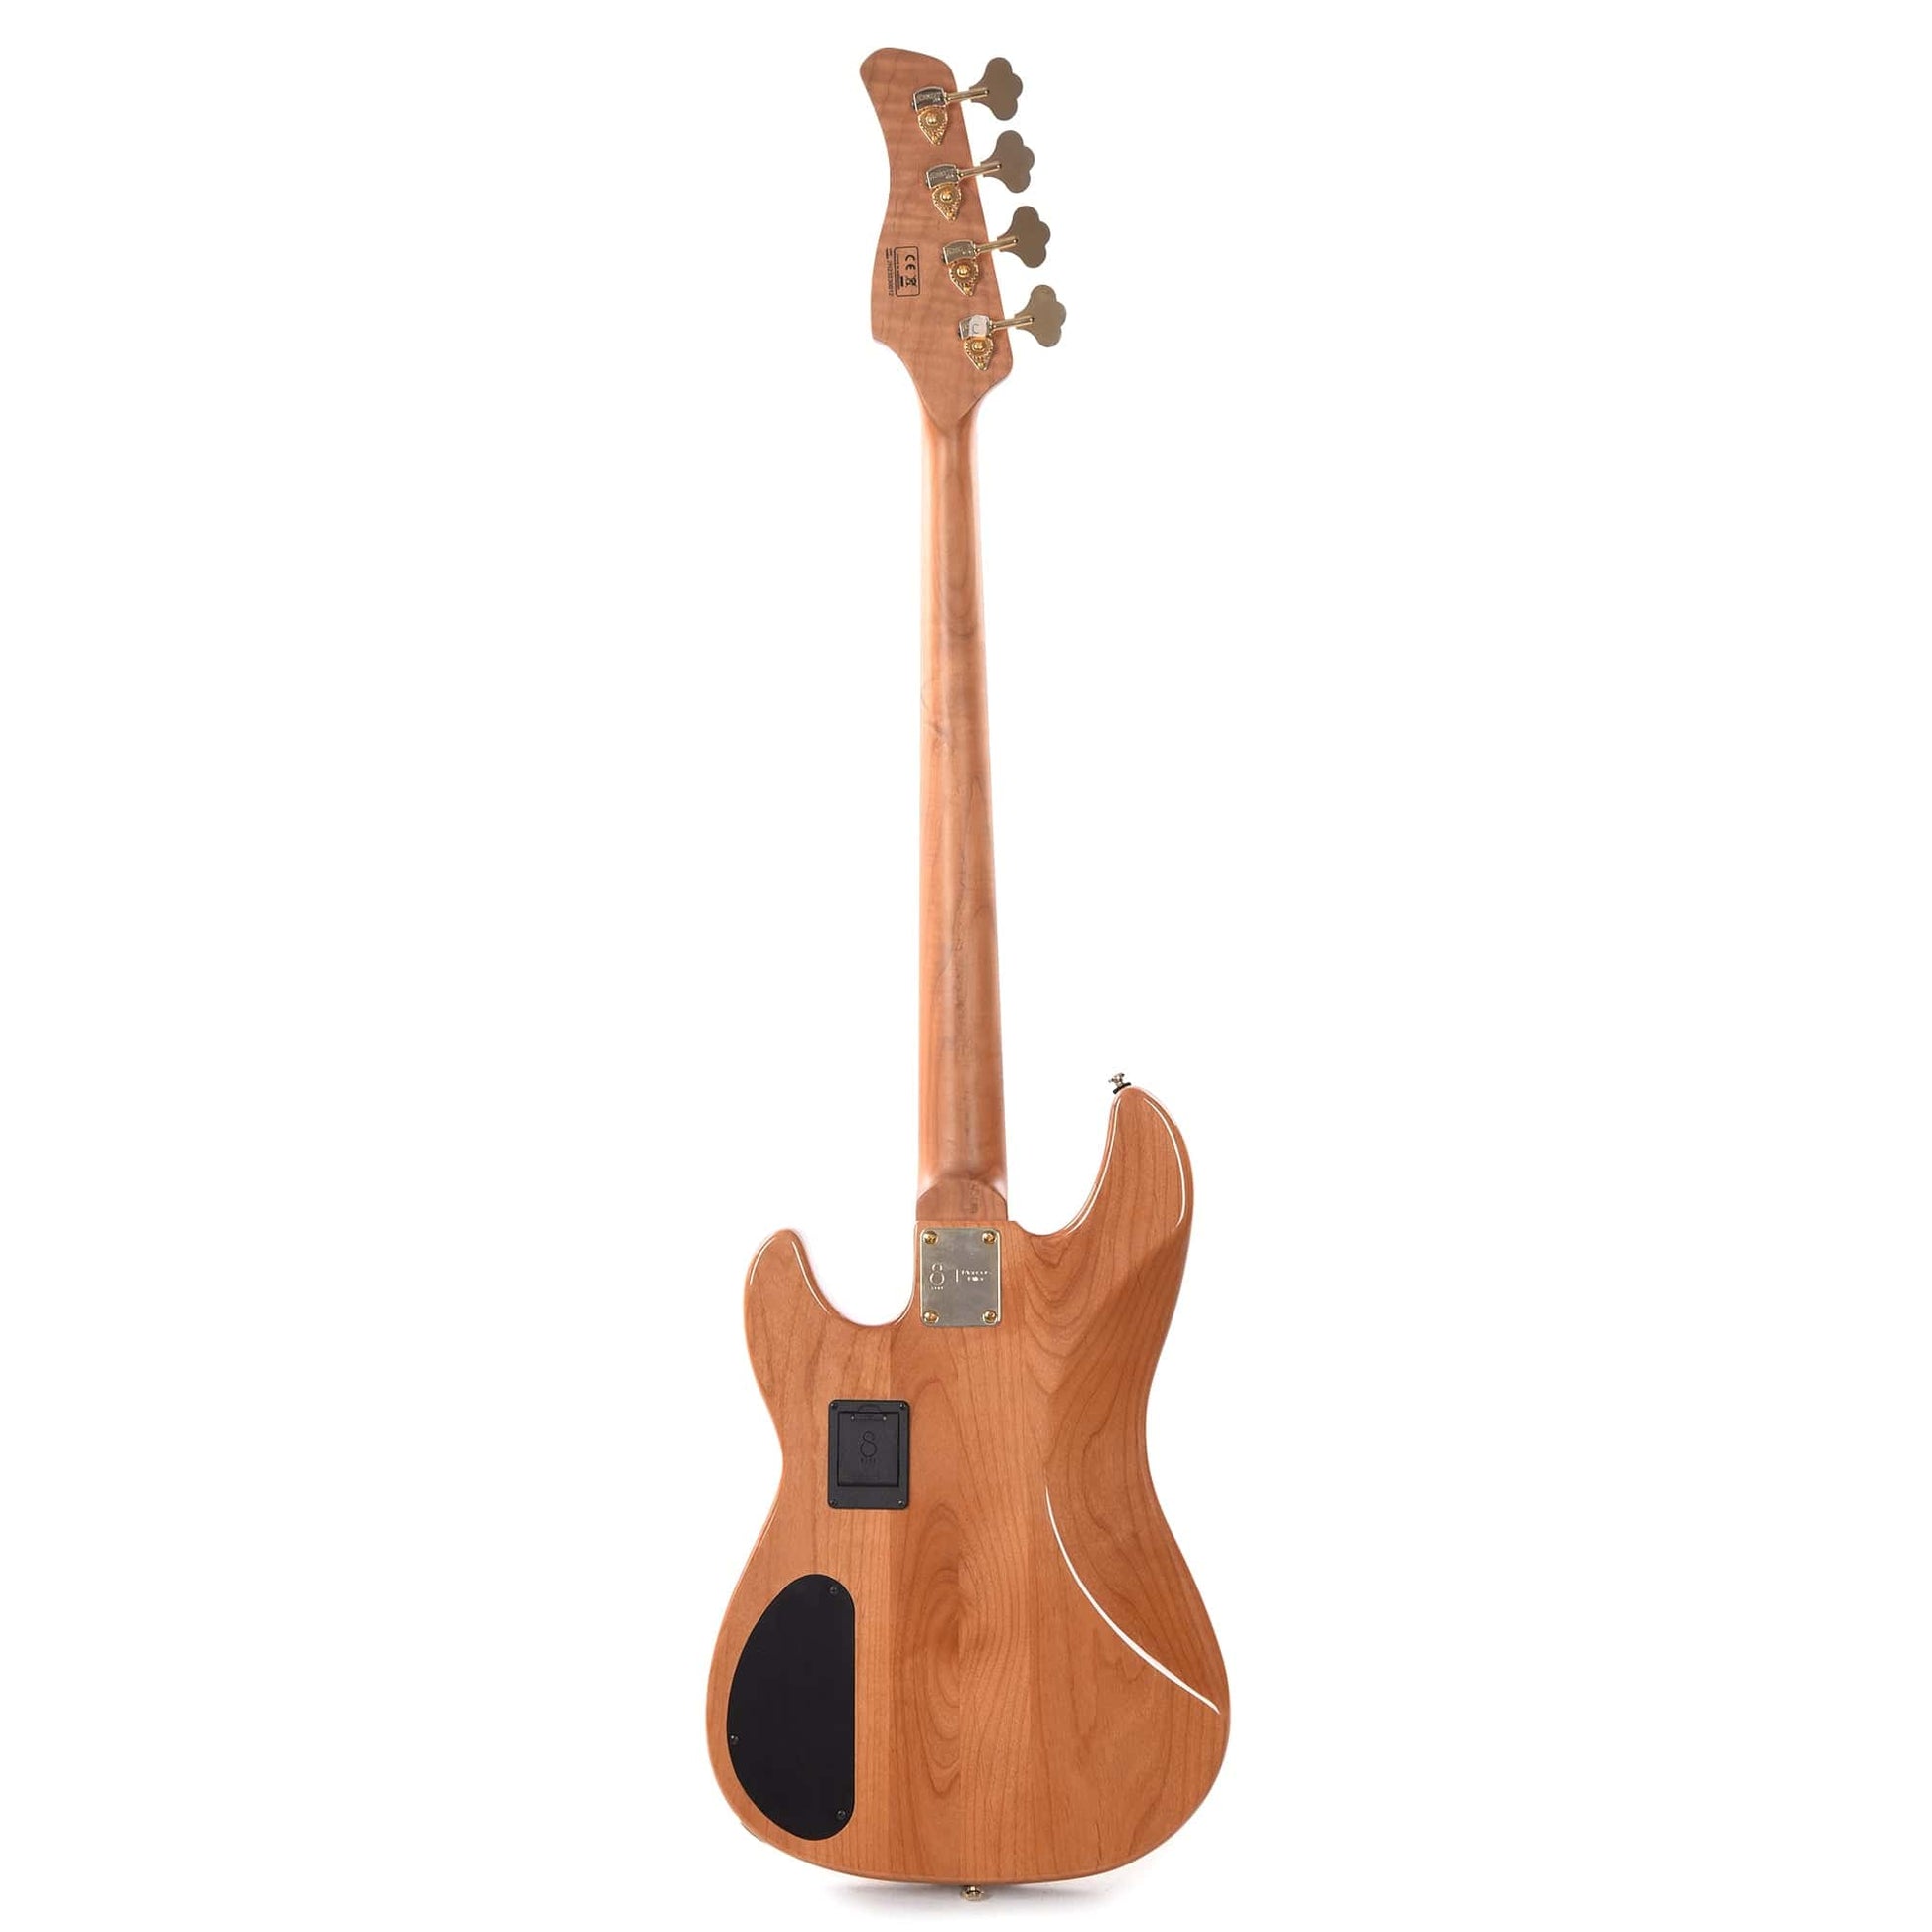 Sire Marcus Miller P10 DX Flame Maple/Alder 4-String Natural Bass Guitars / 4-String